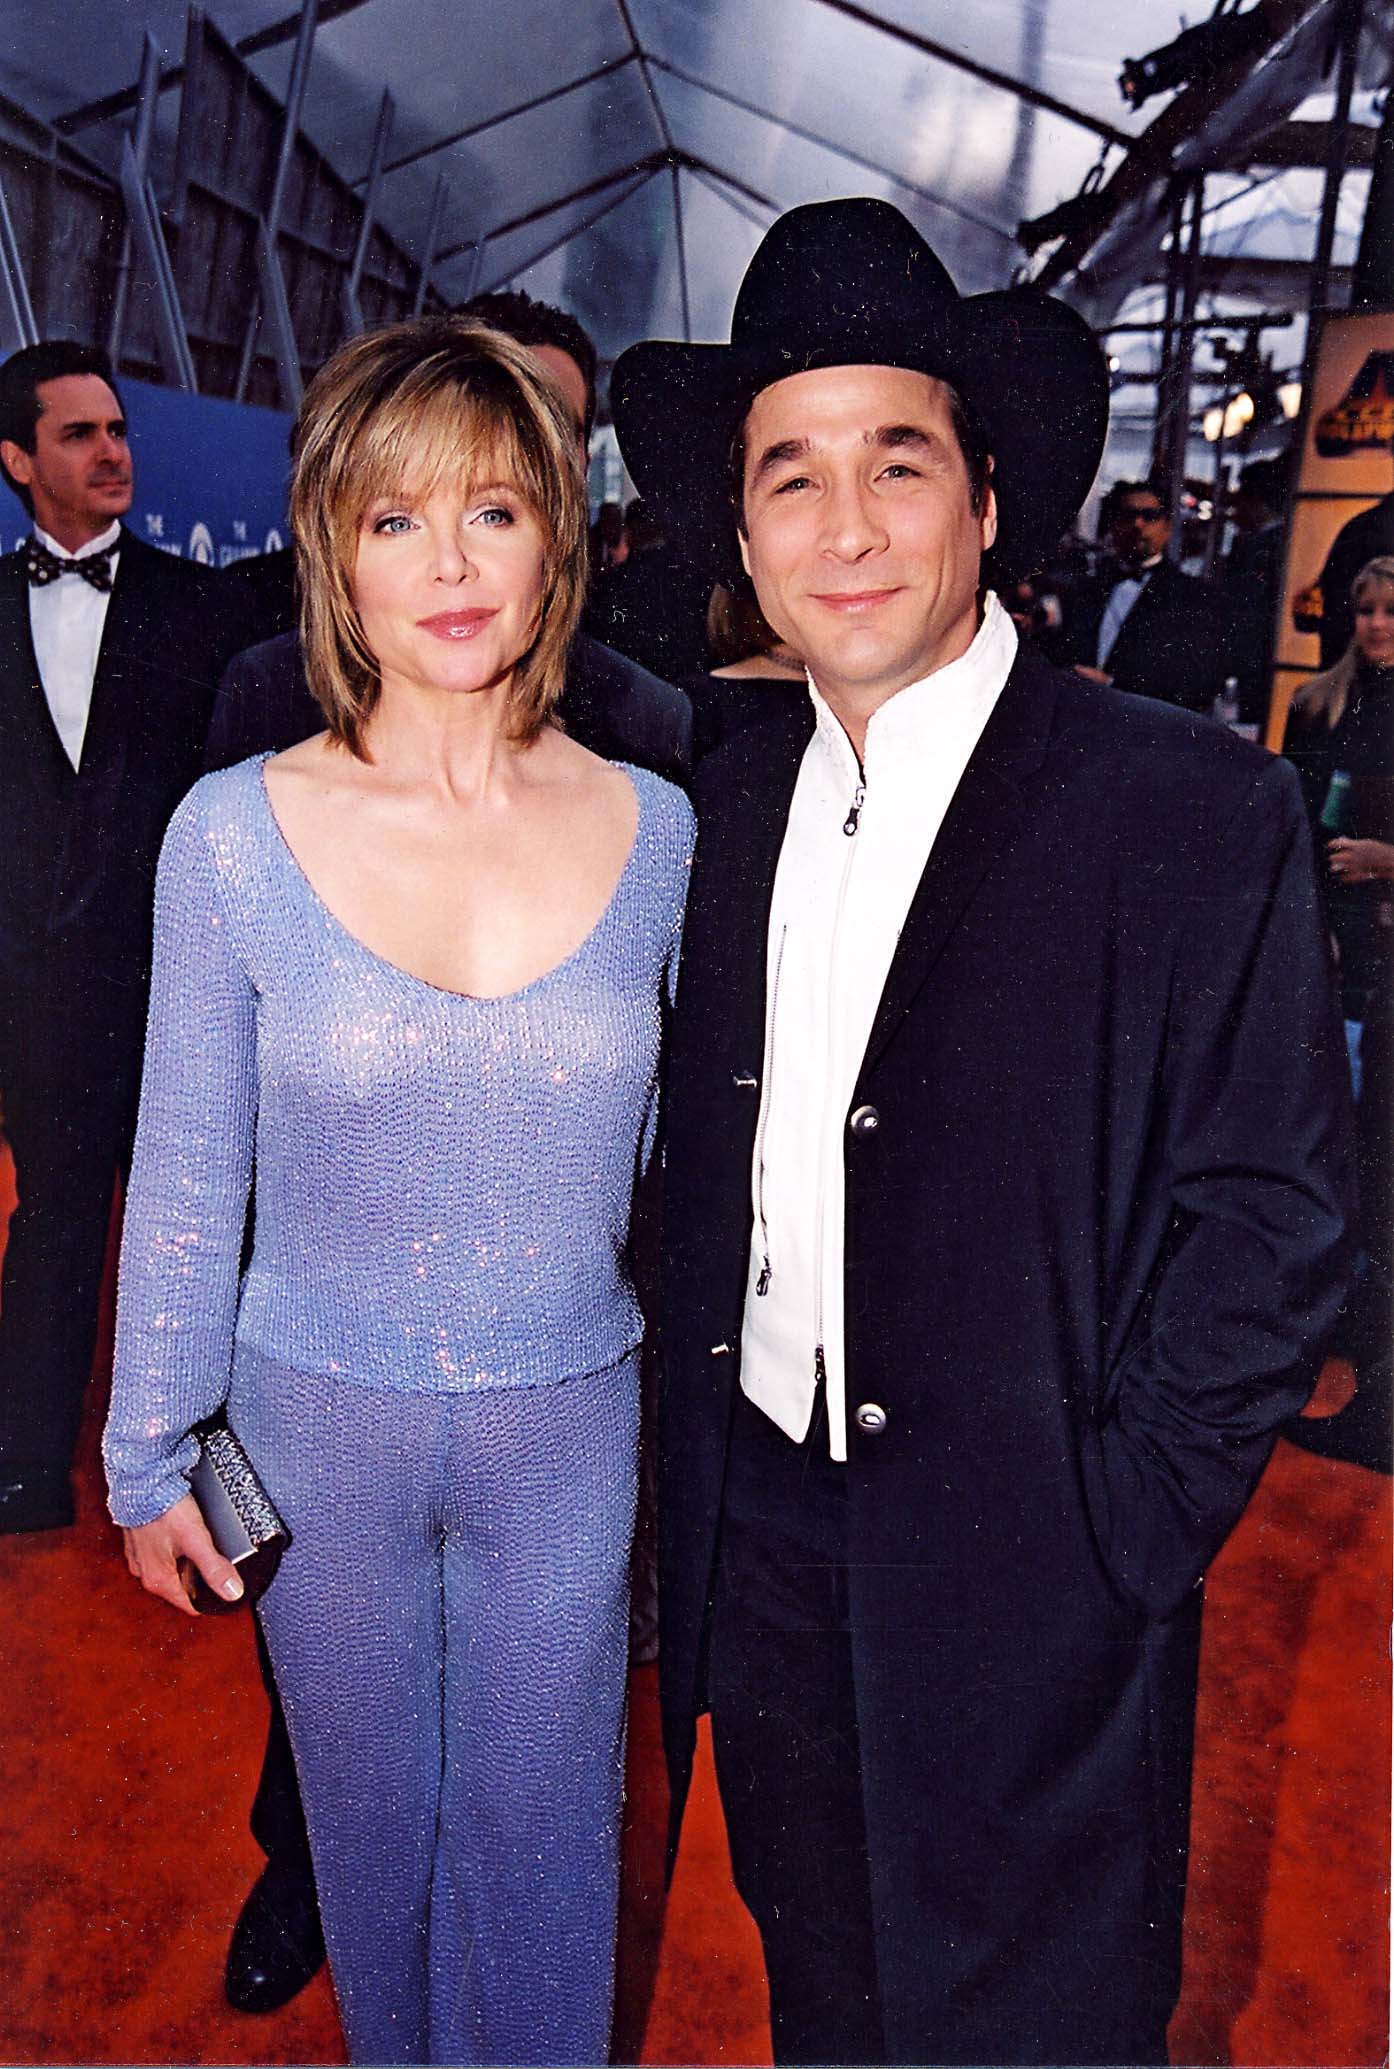 Clint Black and Lisa Hartman Black at the "Albino Alligator" premiere in 1996 | Source: Getty Images